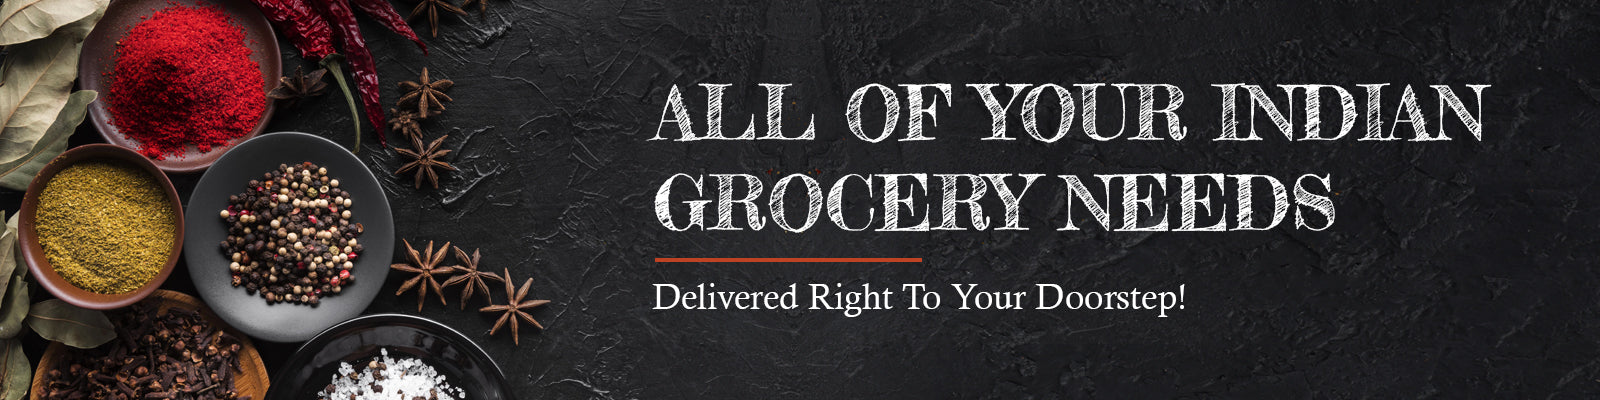 All of your indian groceries delivered right to your doorstep!